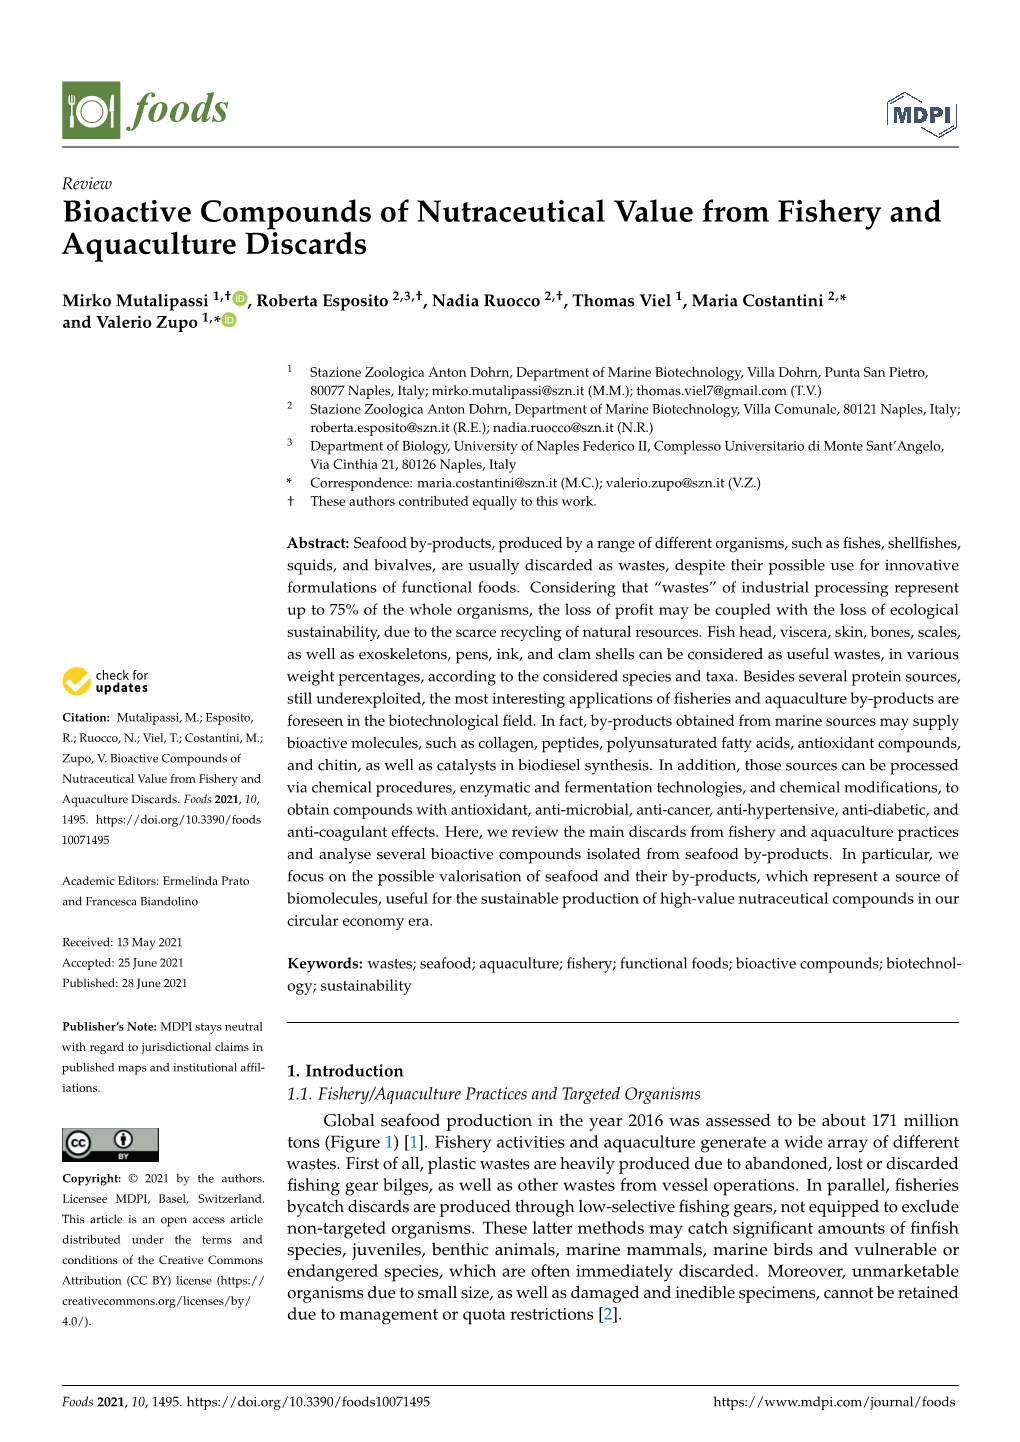 Bioactive Compounds of Nutraceutical Value from Fishery and Aquaculture Discards